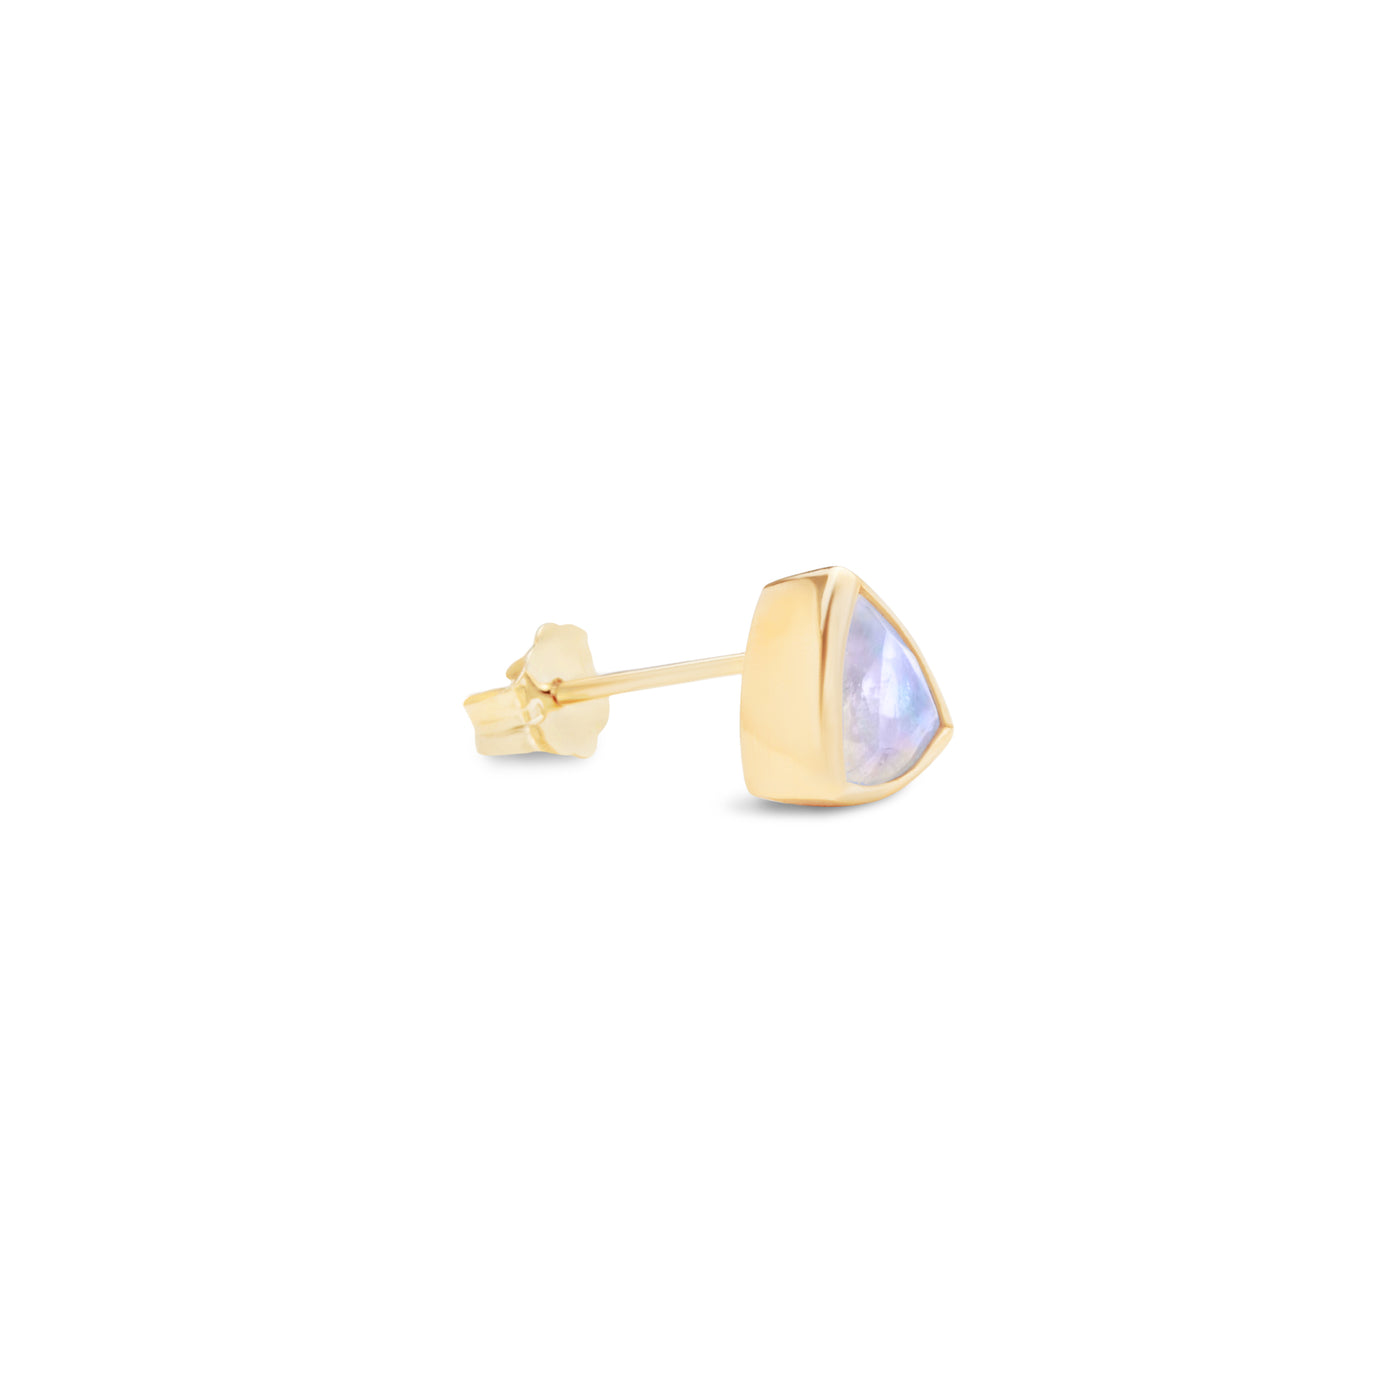 14k Yellow Gold Stud Earring with Moonstone in Triangle Shape laying Flat on White Background Turned for Side View